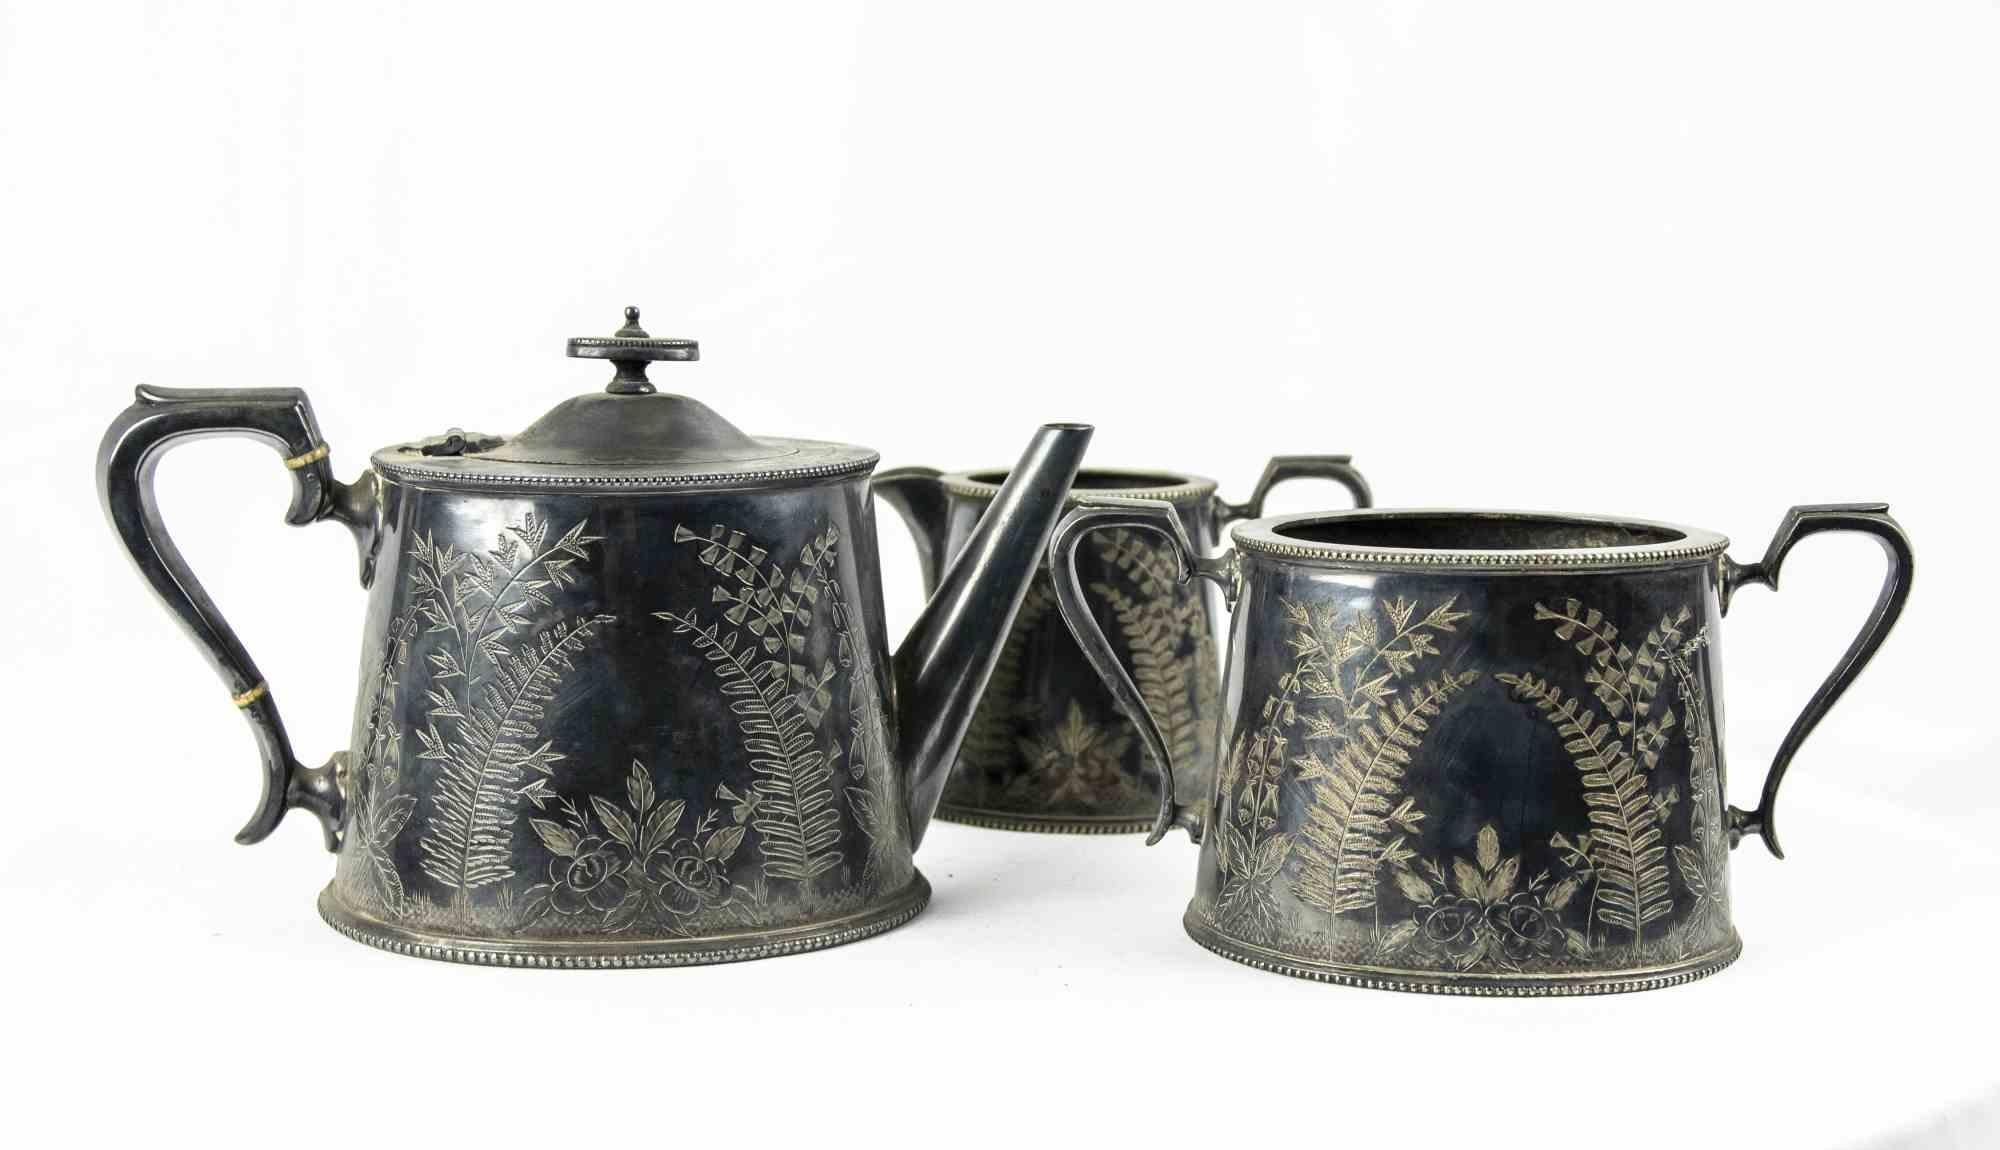 Sheffeld tea set is an original decorative set of objects realized in the half of the 20th century.

Chiseled silverplate.

The set includes three objects; a tea pot, a milk jug and a bowl. The label 